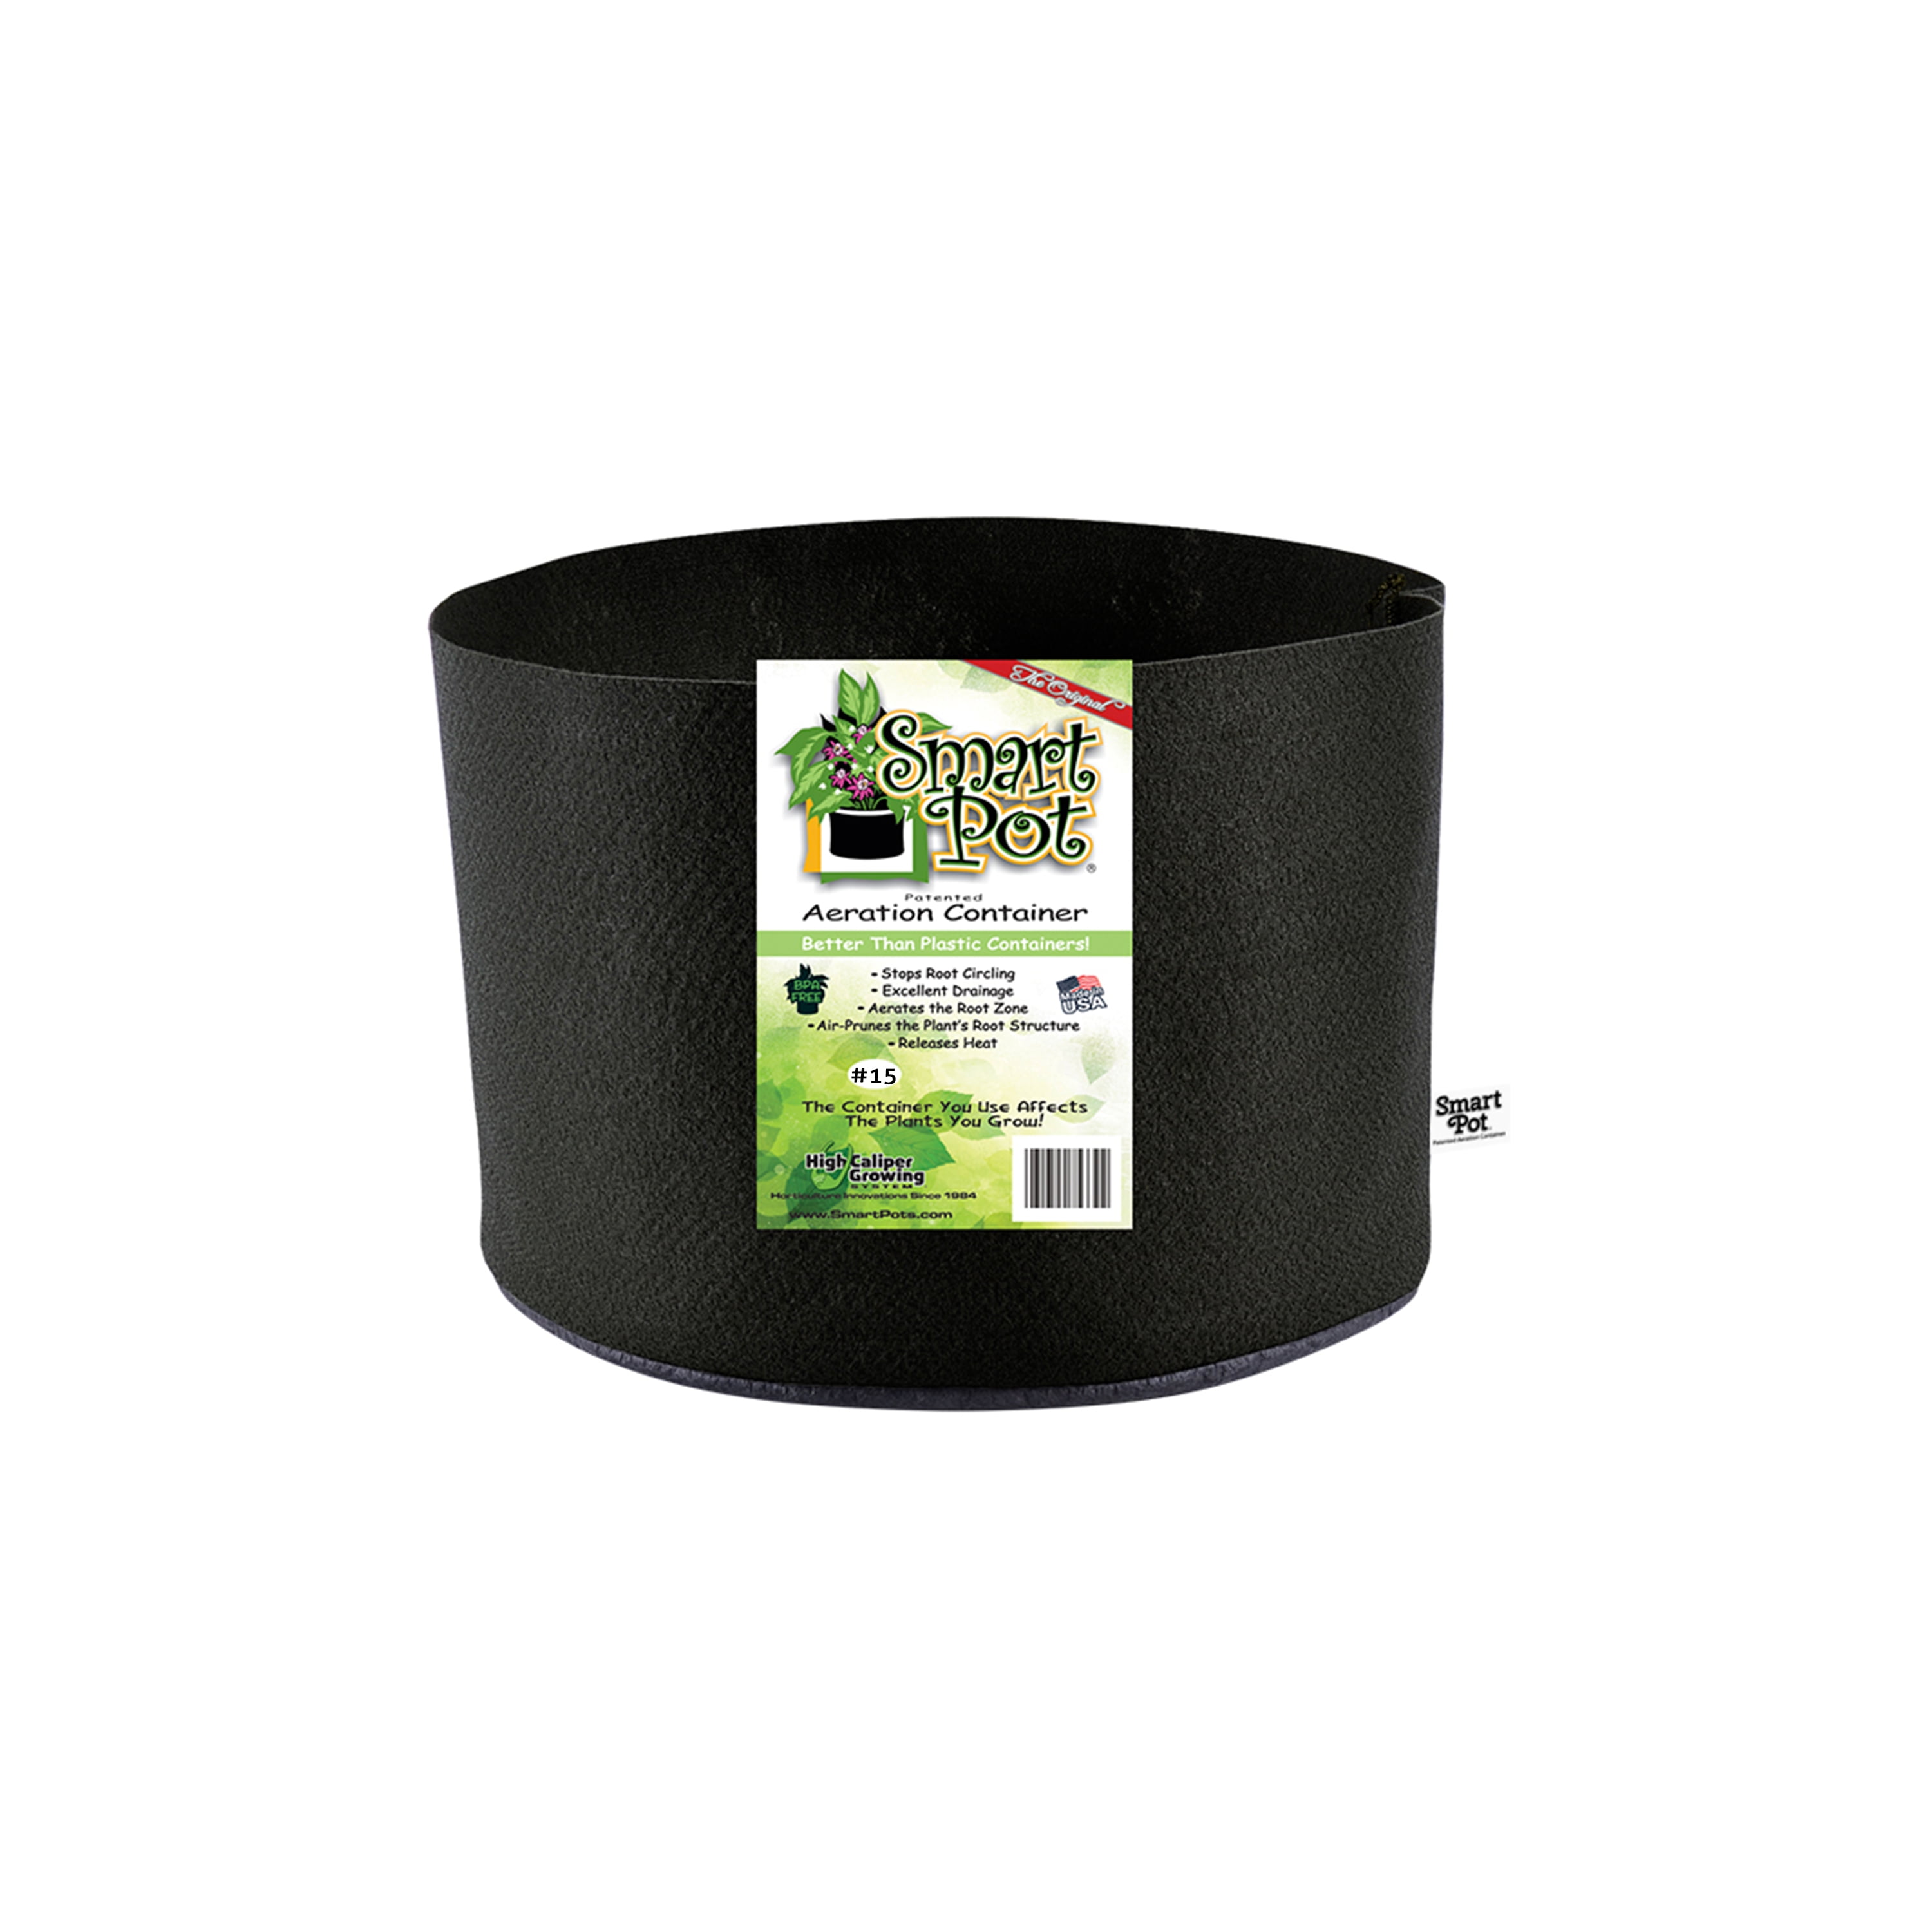 10 15 Gallon Grow Pots Plant Fabric Prune Smart Container gal Bags Dirt lot 